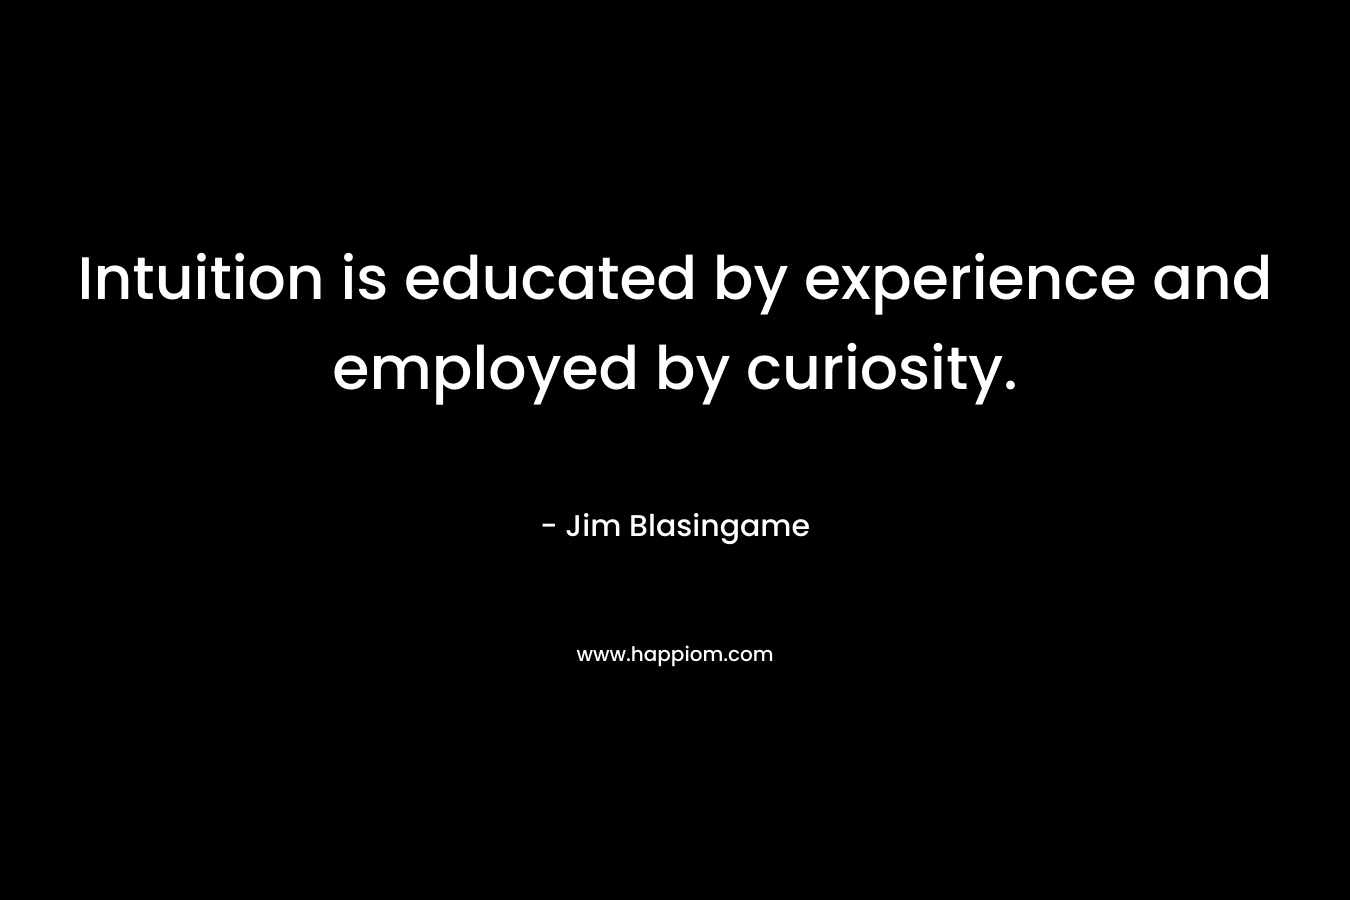 Intuition is educated by experience and employed by curiosity. – Jim Blasingame